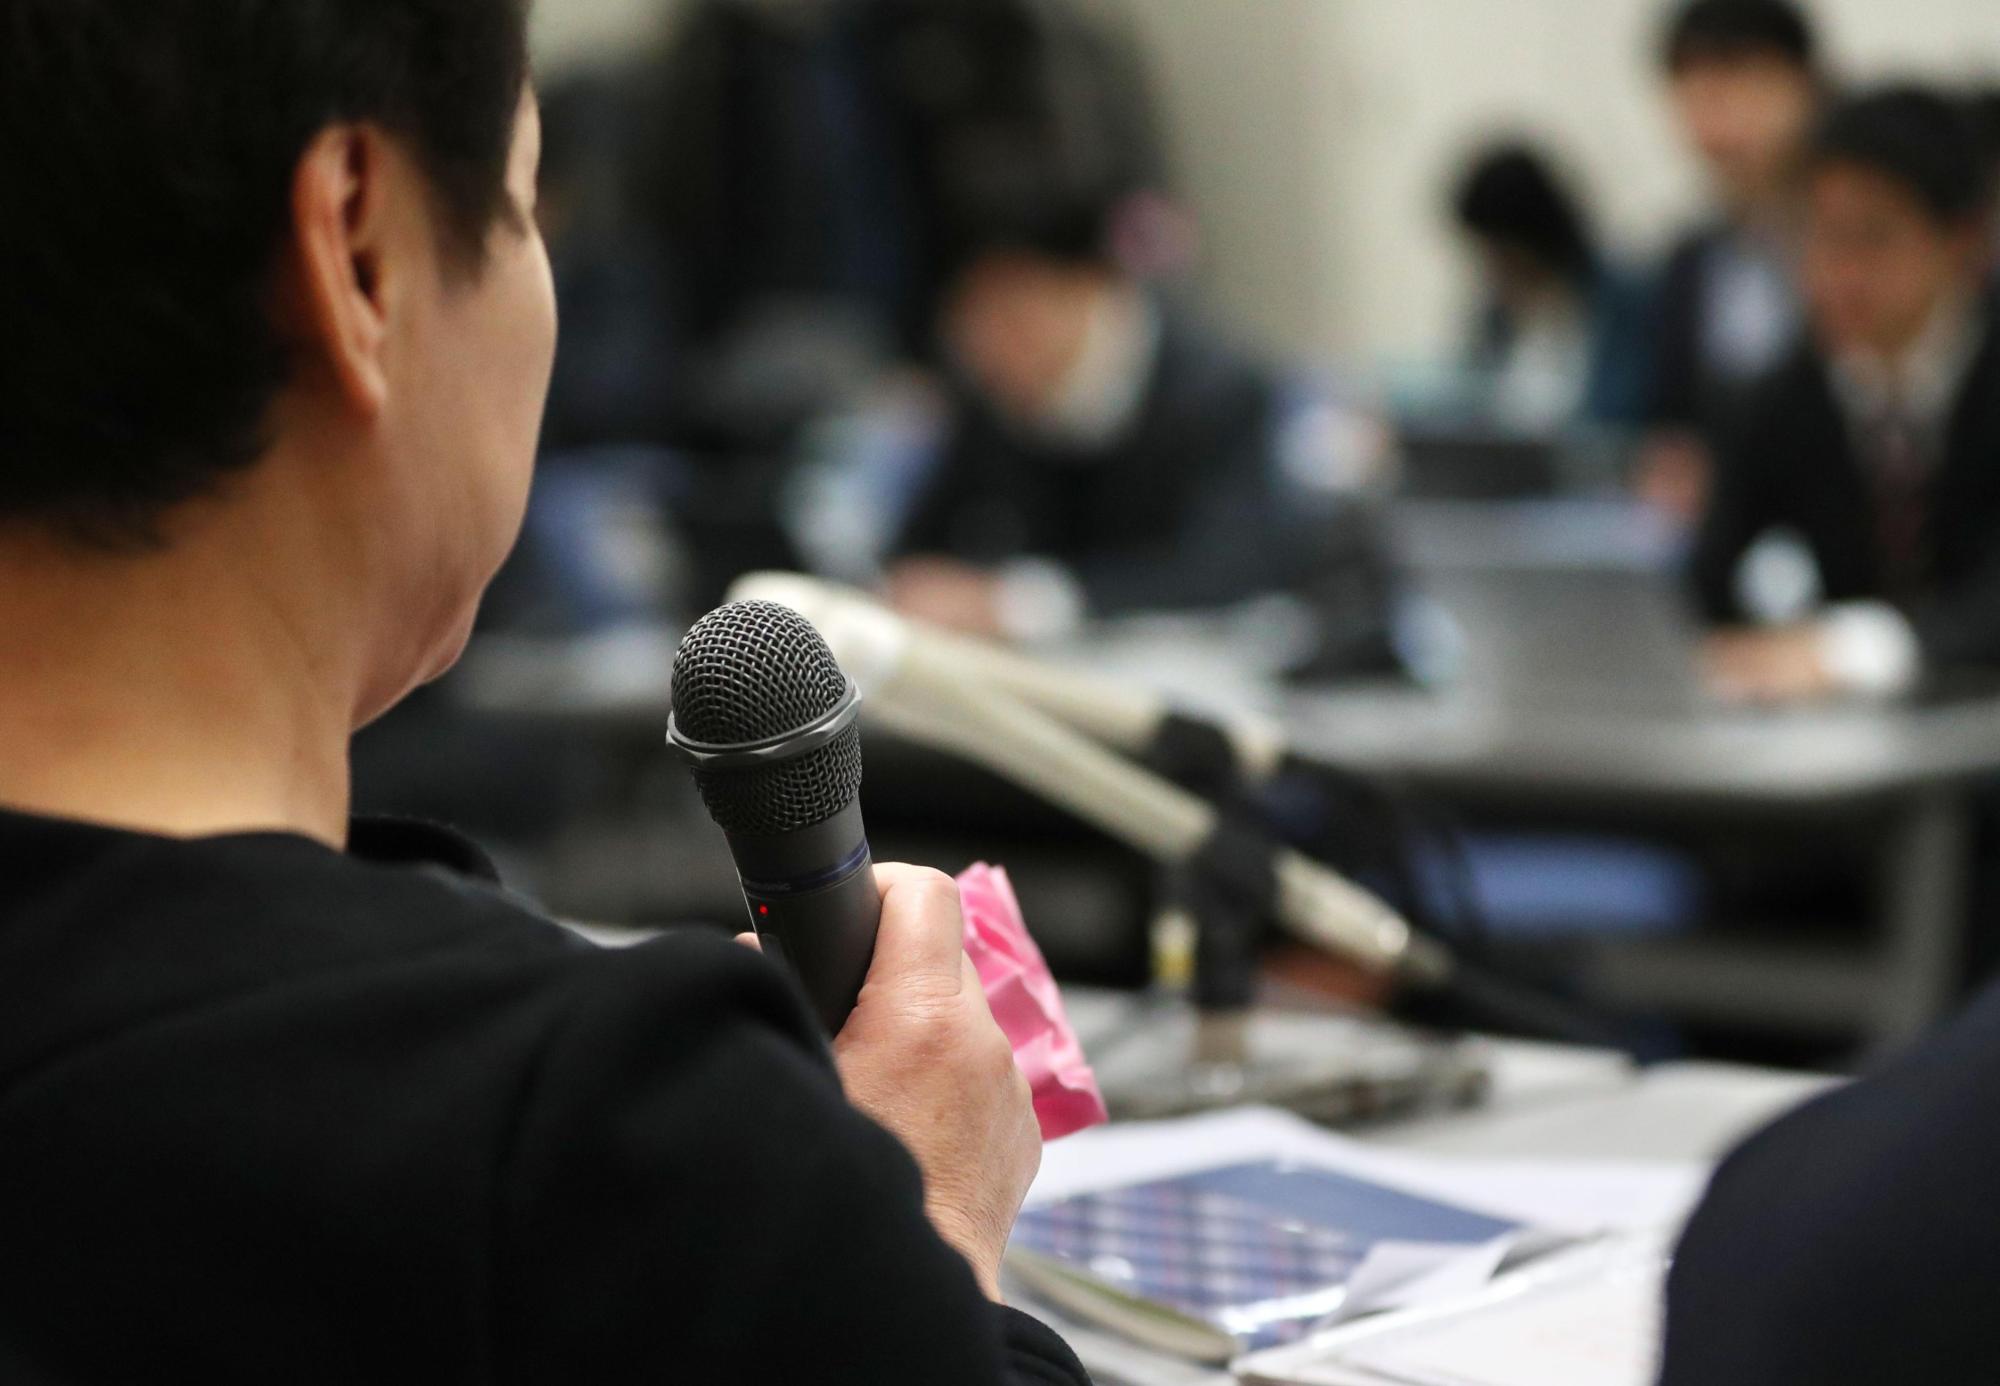 The sister of woman who filed a lawsuit against the government last month seeking compensation over her forced sterilization speaks at a news conference on Jan. 30 in Sendai. | KYODO